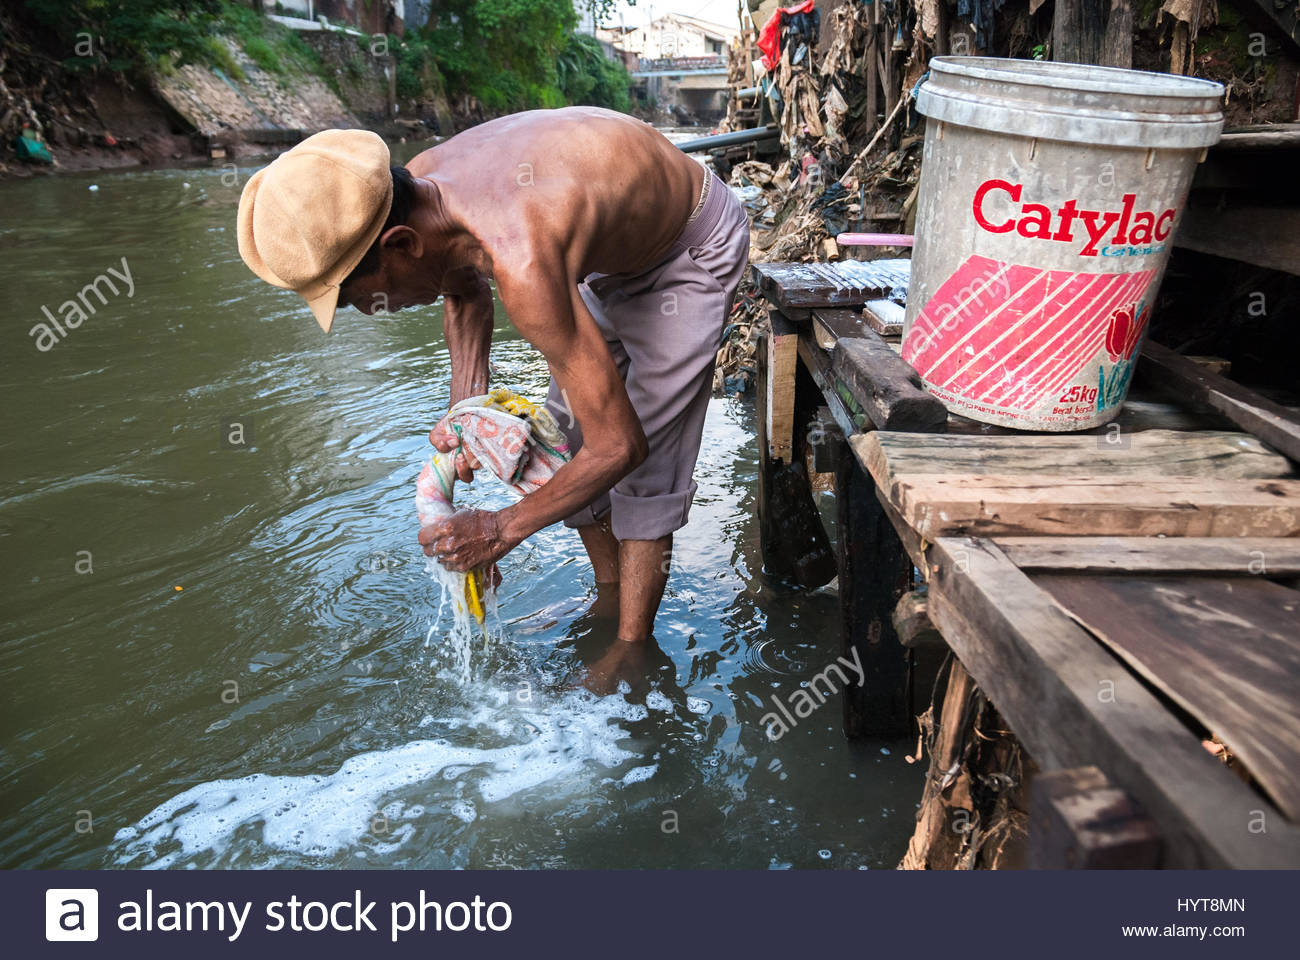 A man washes a towel on the Ciliwung River in Bukit Duri area, Jakarta, Indonesia. (Alamy Stock Photo, Reynold Sumayku , July 5, 2009)